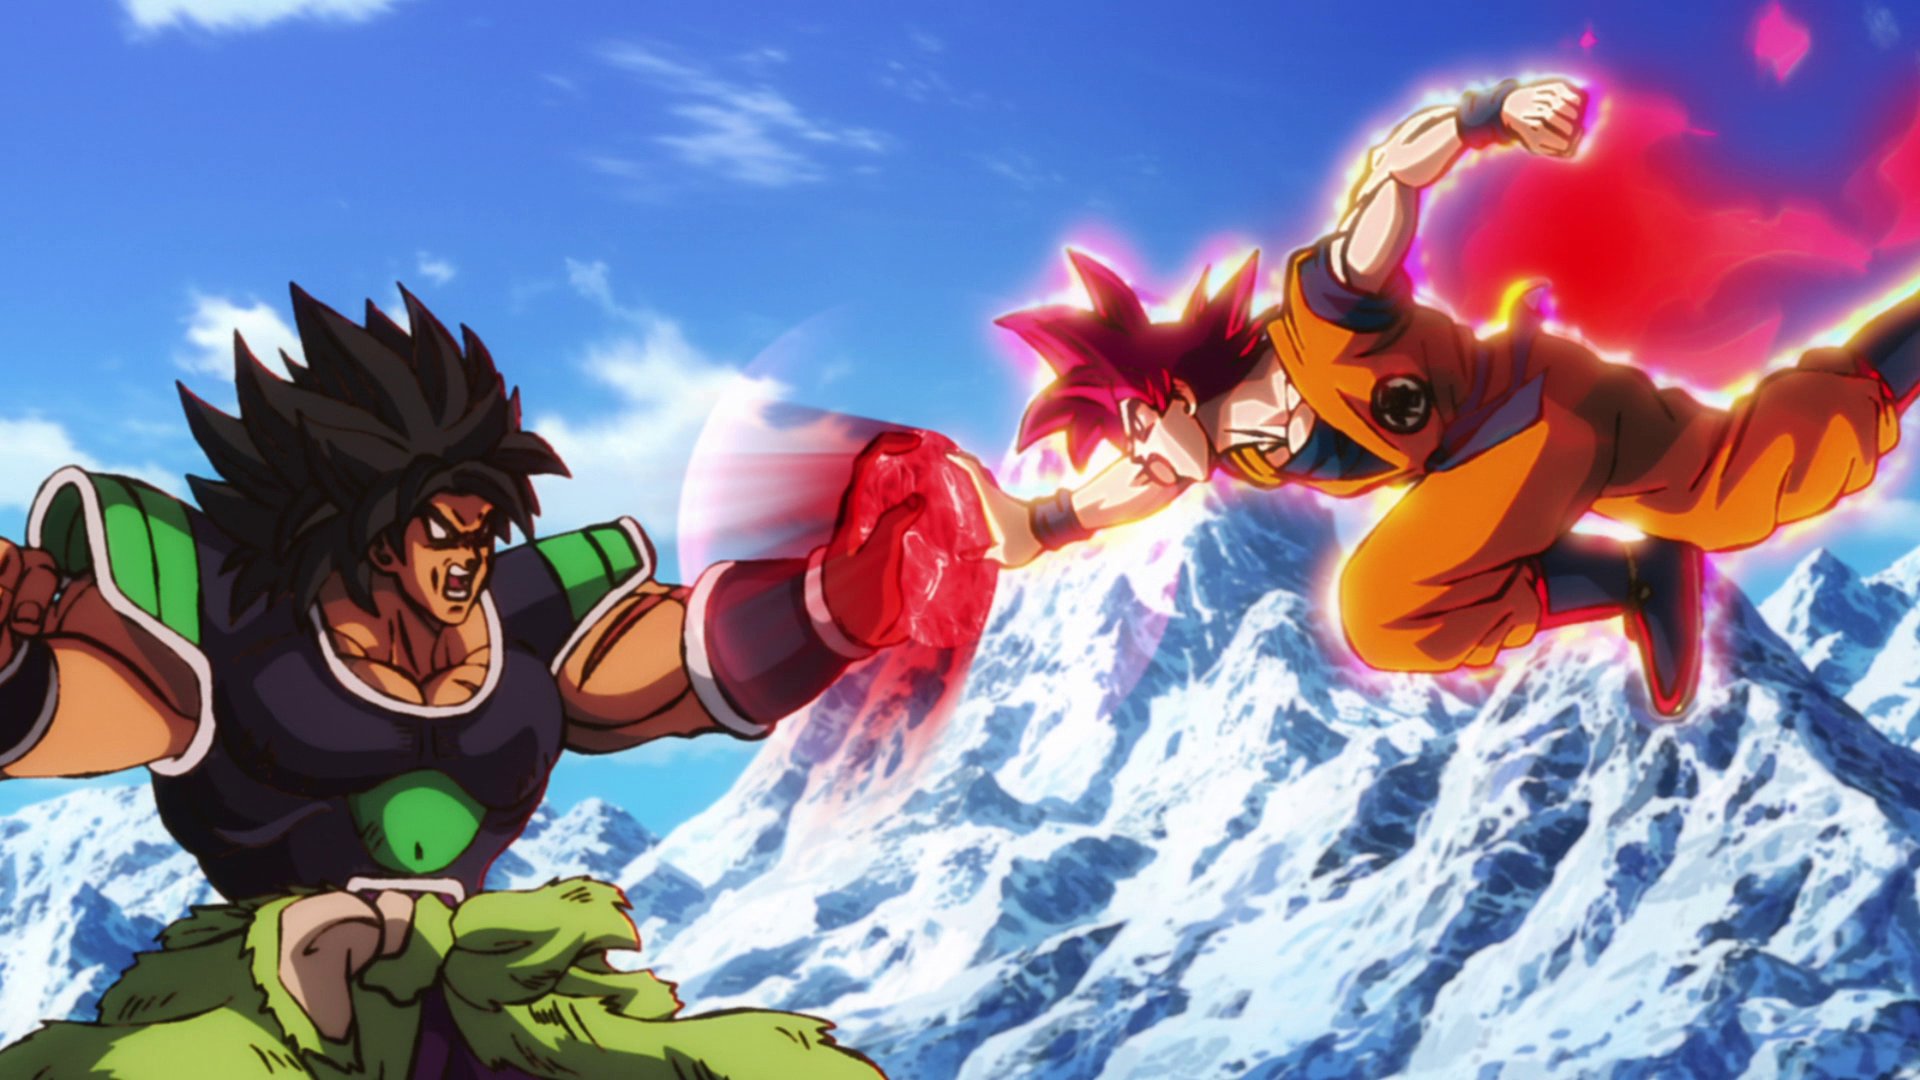 From Goku to Broly, Top 10 Strongest Characters in Dragon Ball Z Anime